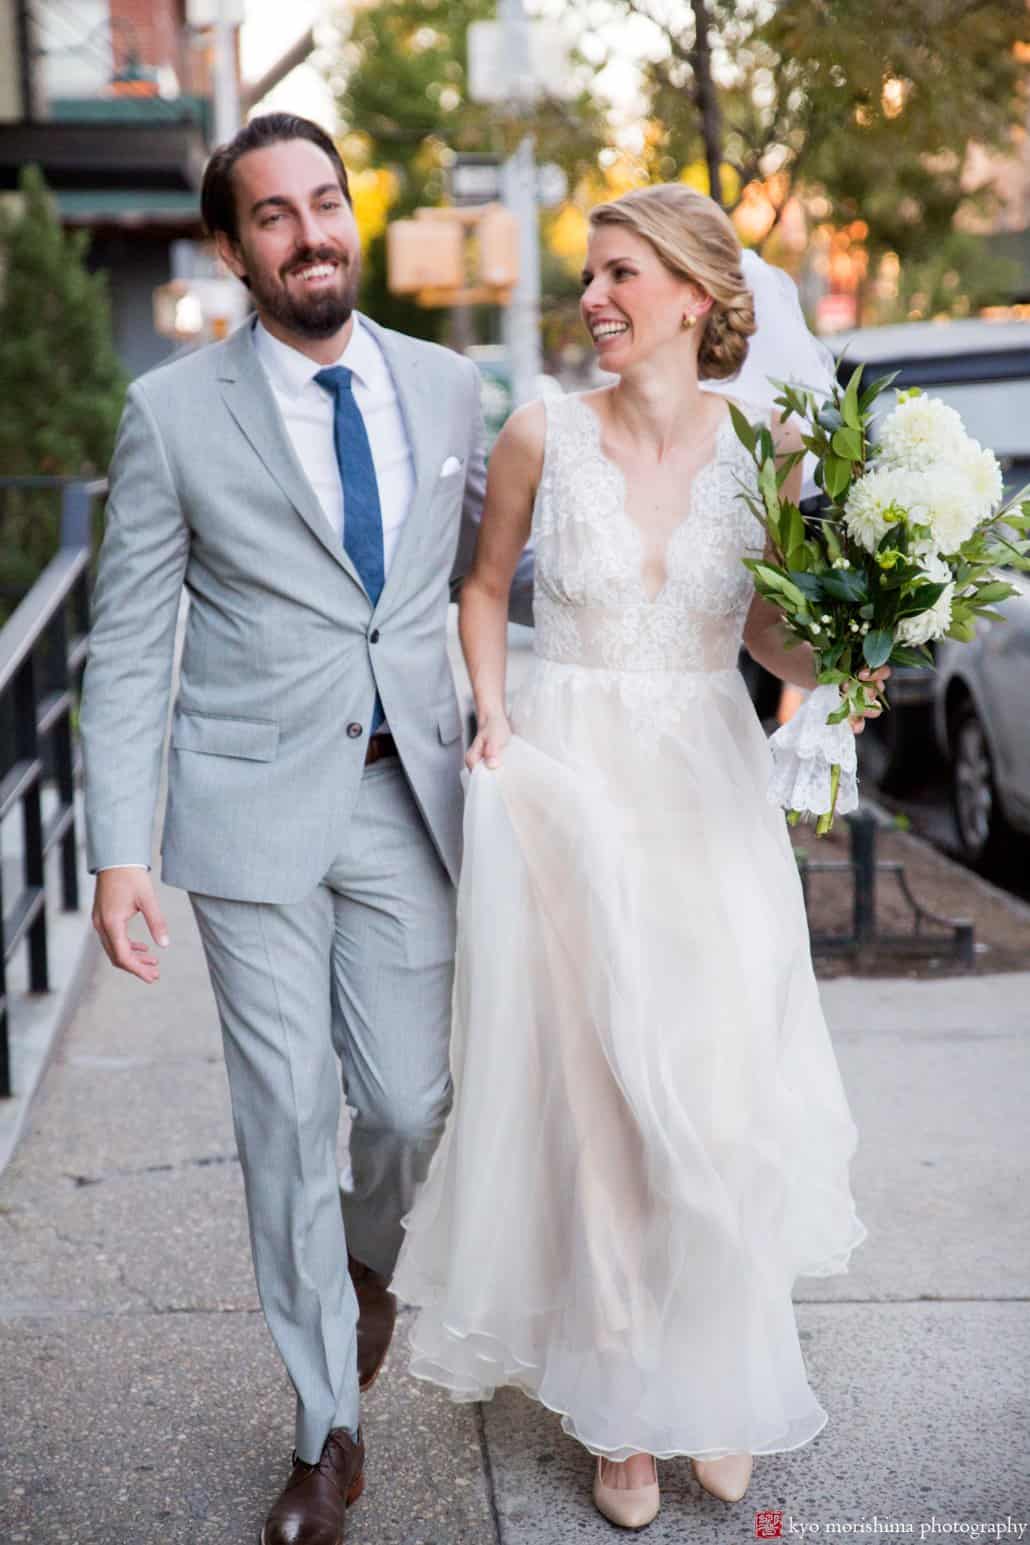 Bride and groom laugh as they walk on Union Street after Green Building Brooklyn wedding ceremony, photographed by Kyo Morishima